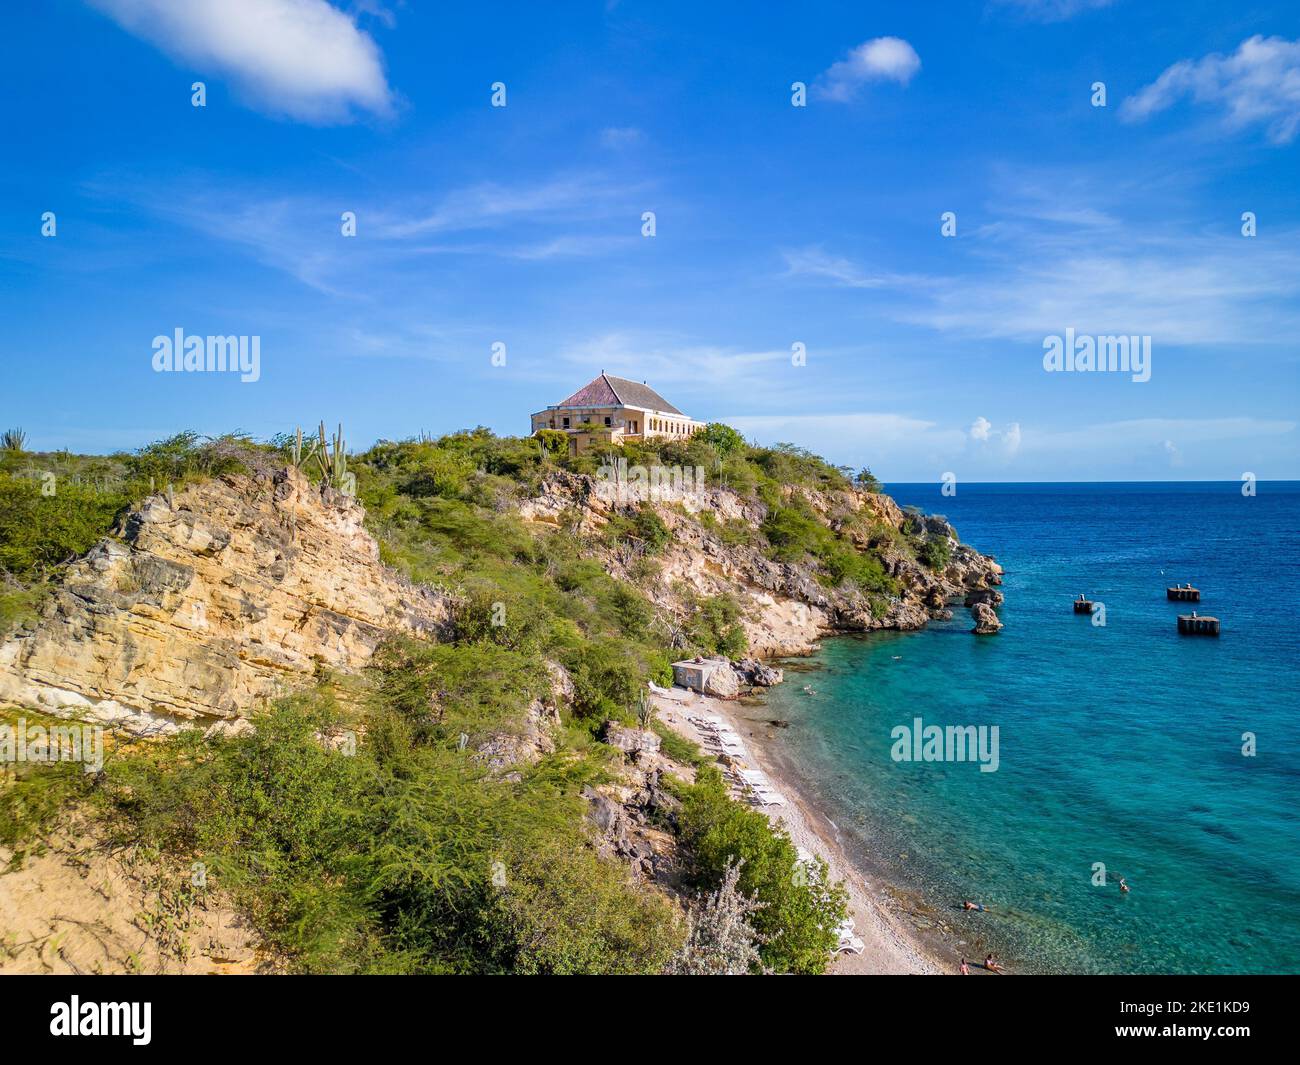 An aerial shot of the scenic Caracas Bay in Willemstad Curacao with blue seawater and skyscape Stock Photo